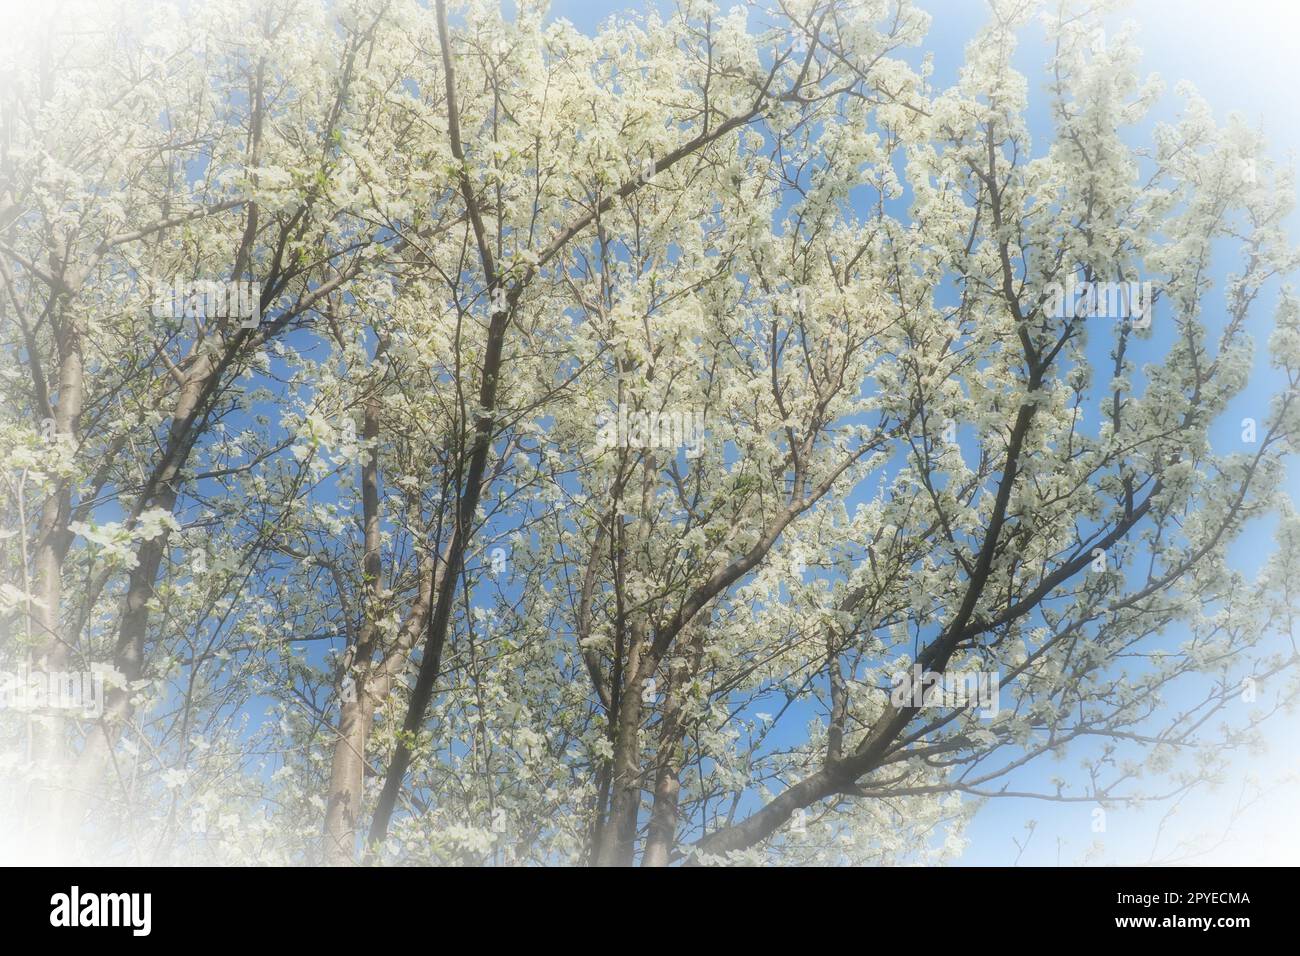 Blossoming of cherries, sweet cherries and bird cherry. Numerous beautiful fragrant white flowers on the tree. Spring flowers are collected in drooping brushes. Blurred foggy focus. White vignetting. Stock Photo